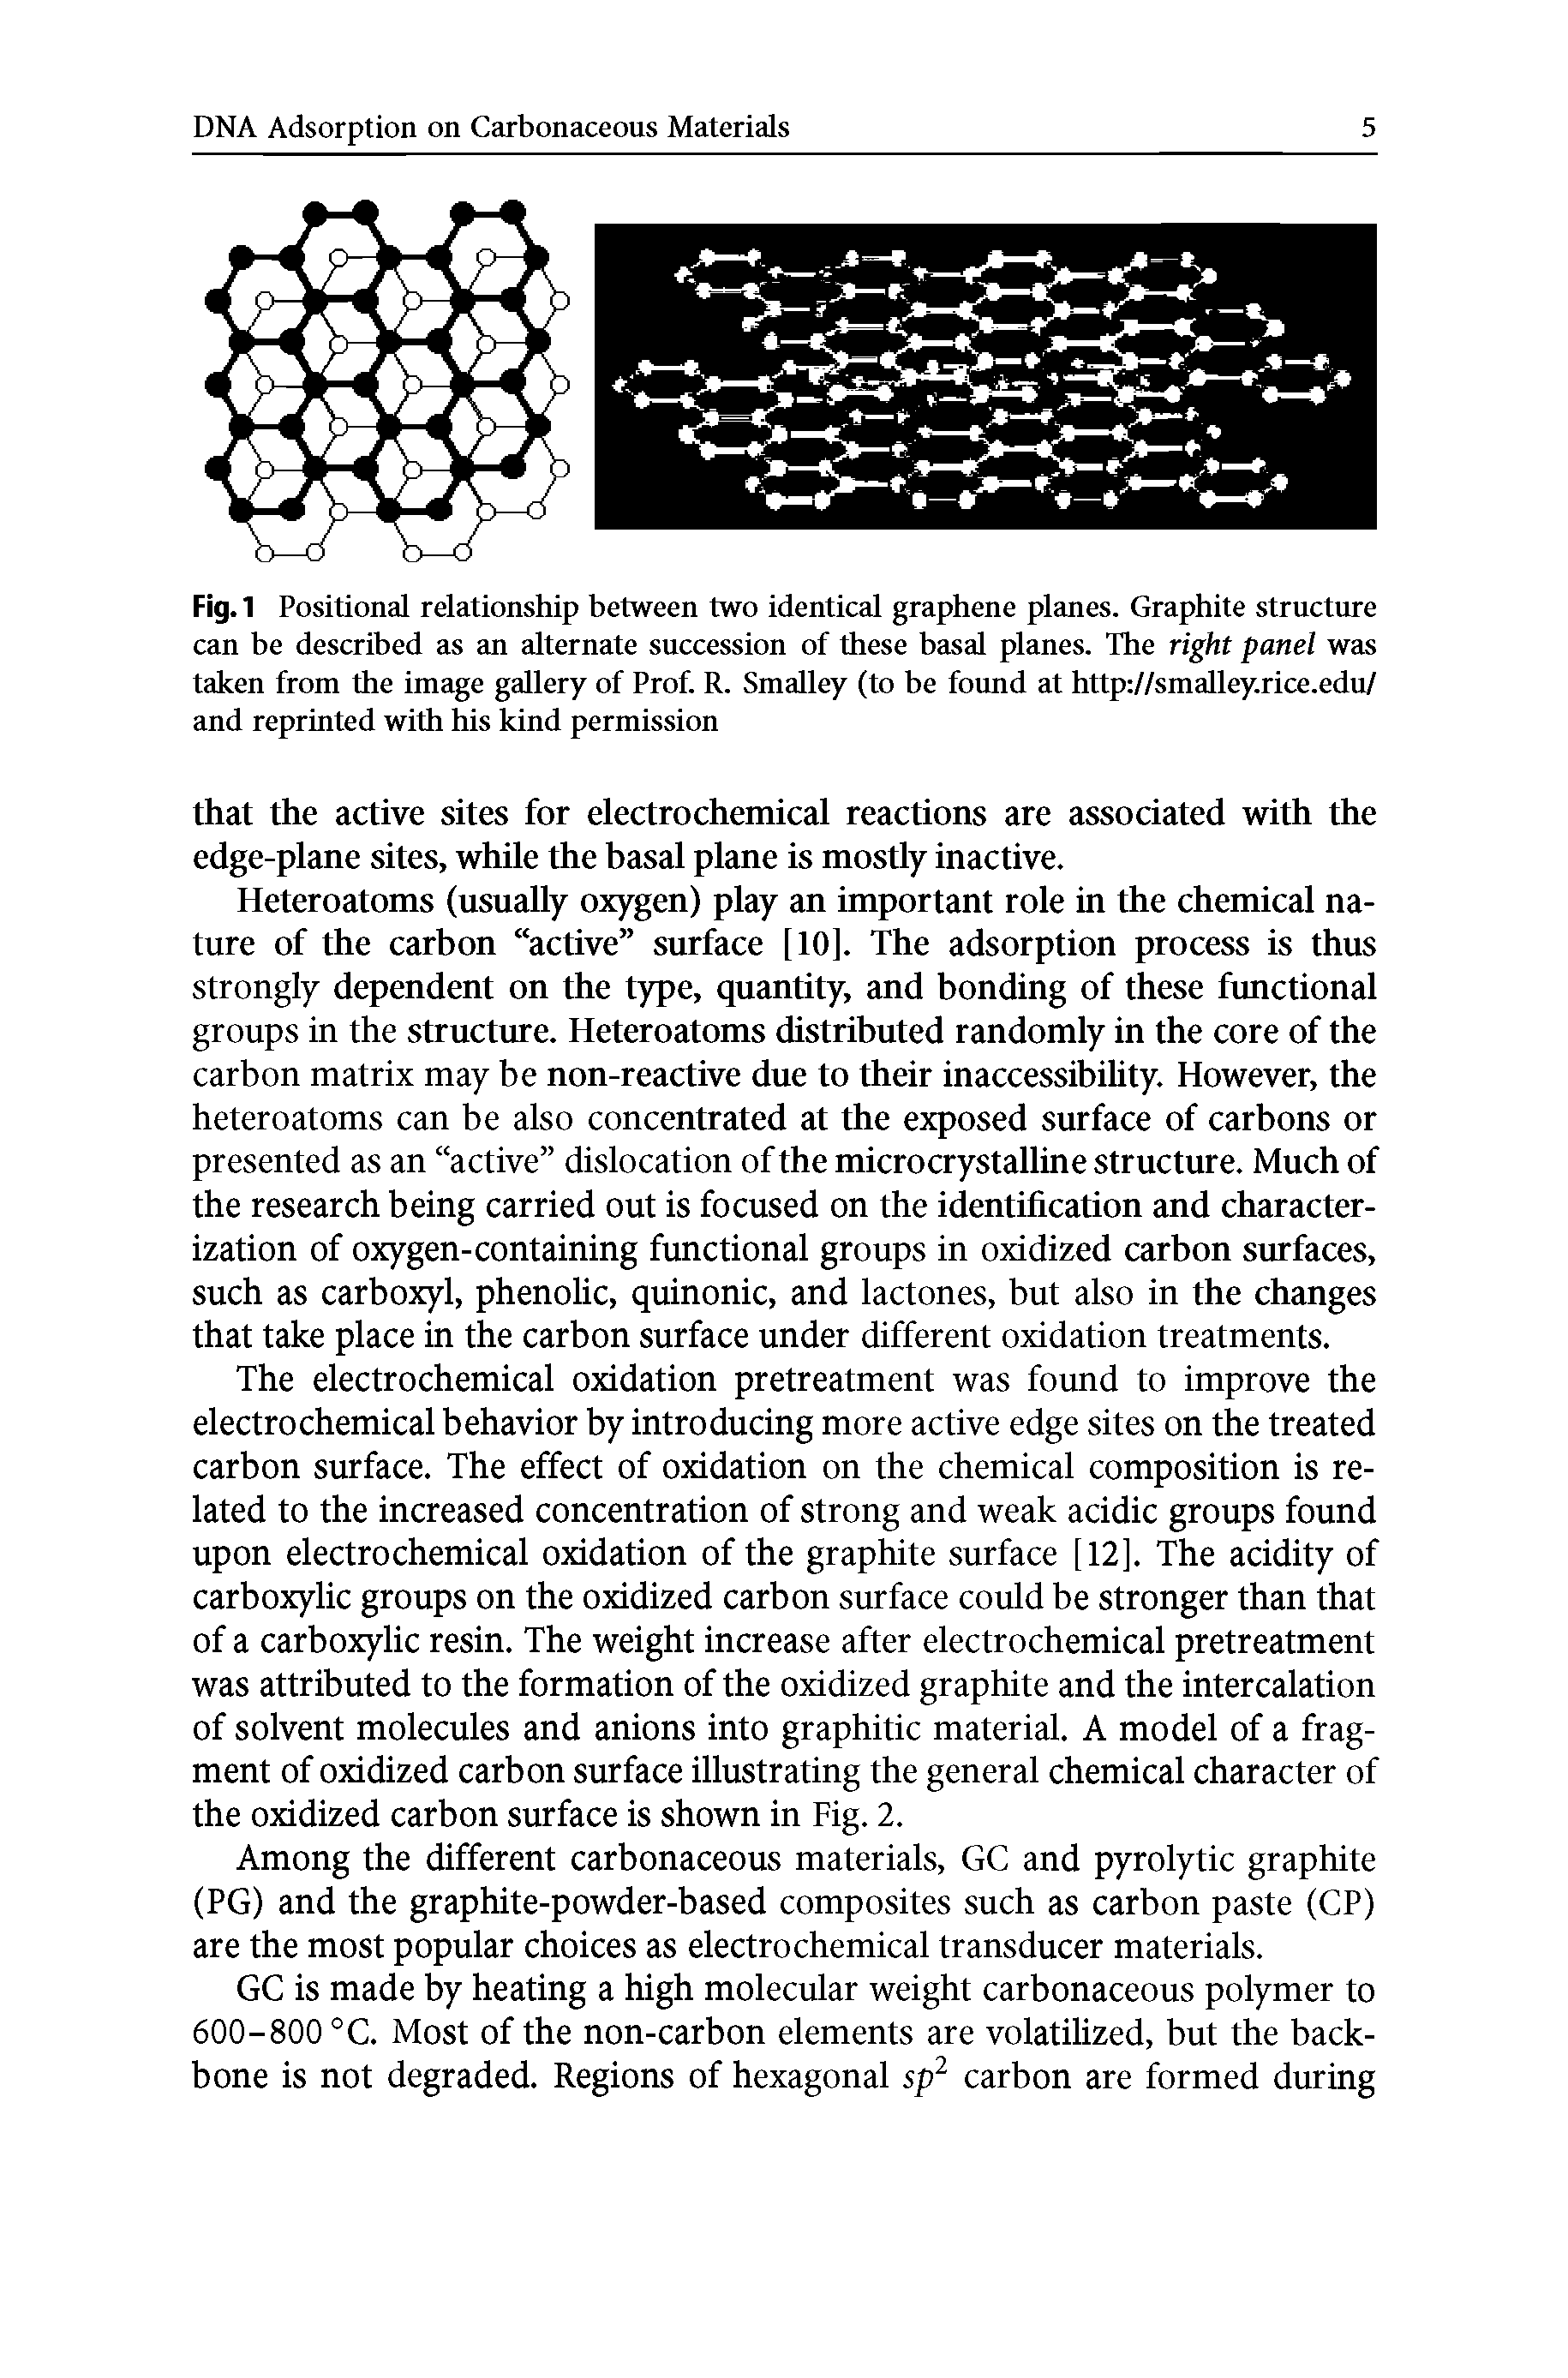 Fig.1 Positional relationship between two identical graphene planes. Graphite structiu e can be described as an alternate succession of these basal planes. The right panel was taken from the image gallery of Prof. R. Smalley (to be foimd at http //smalley.rice.edu/ and reprinted with his kind permission...